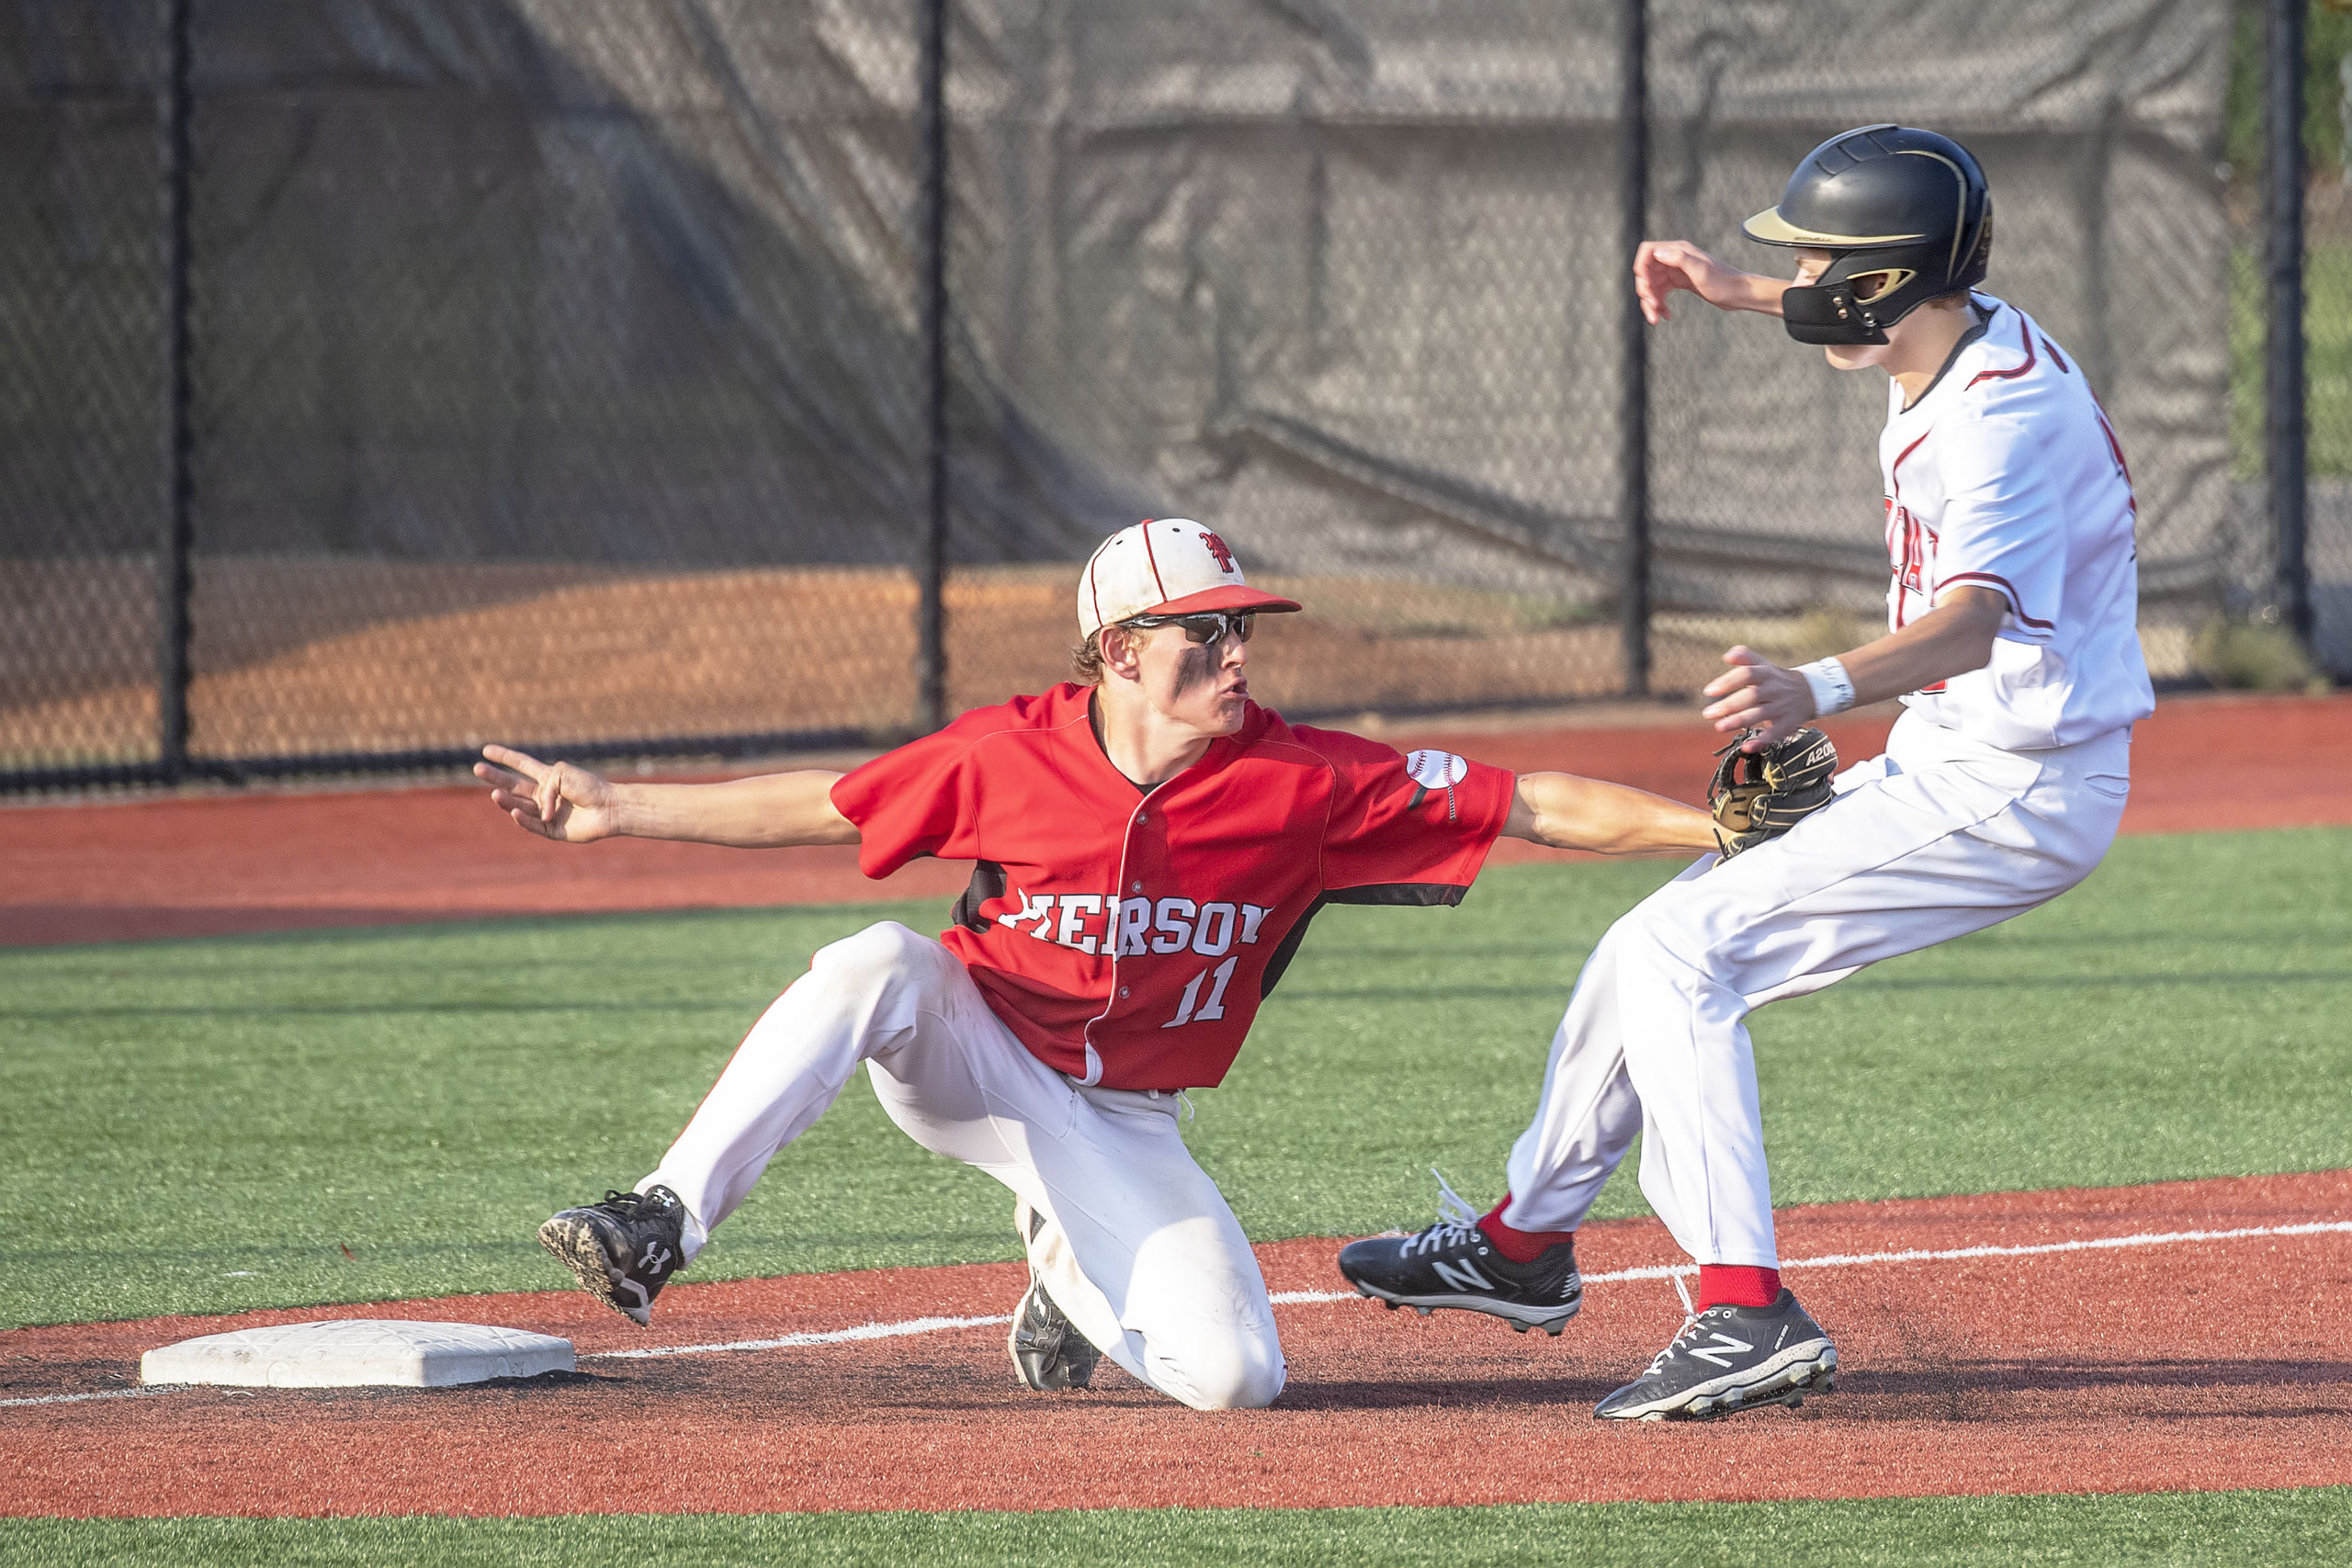 Pierson's Gavin Gilbride tags a runner out at third.